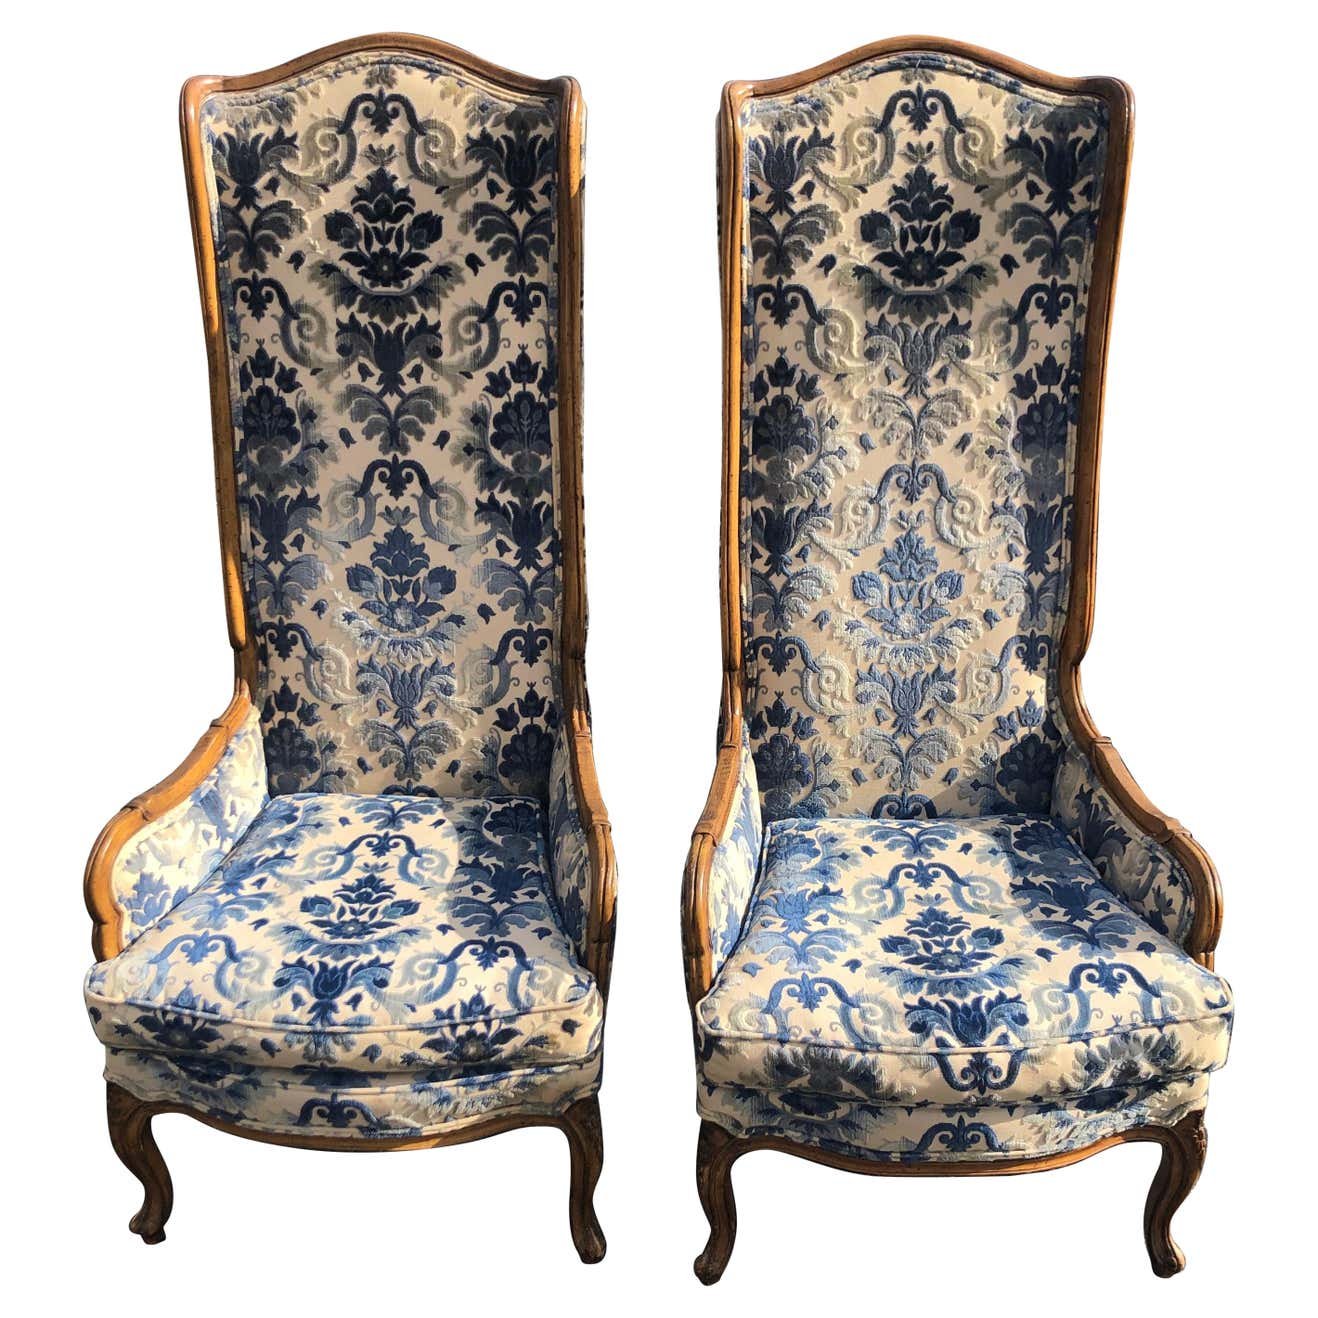 Pair of Throne Chairs